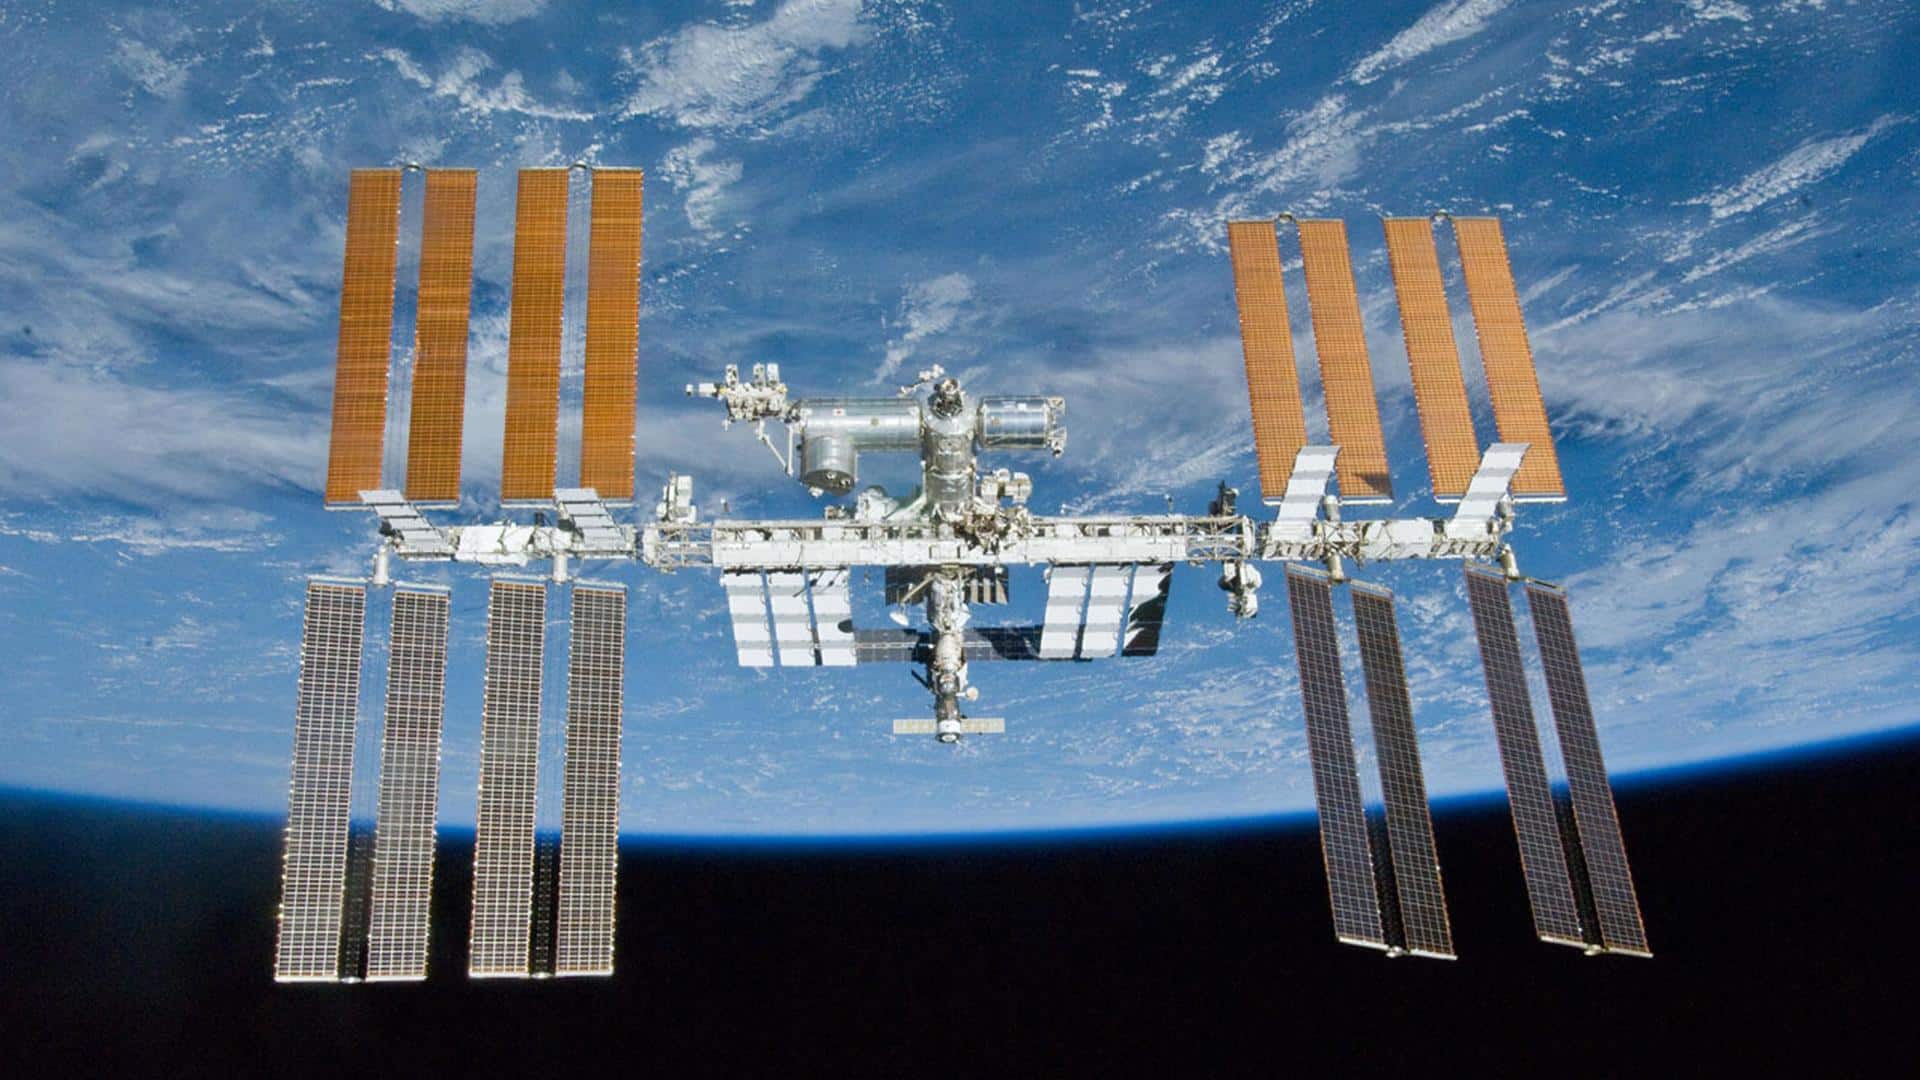 SpaceX Dragon docks at ISS; delivers science equipment, Thanksgiving treats